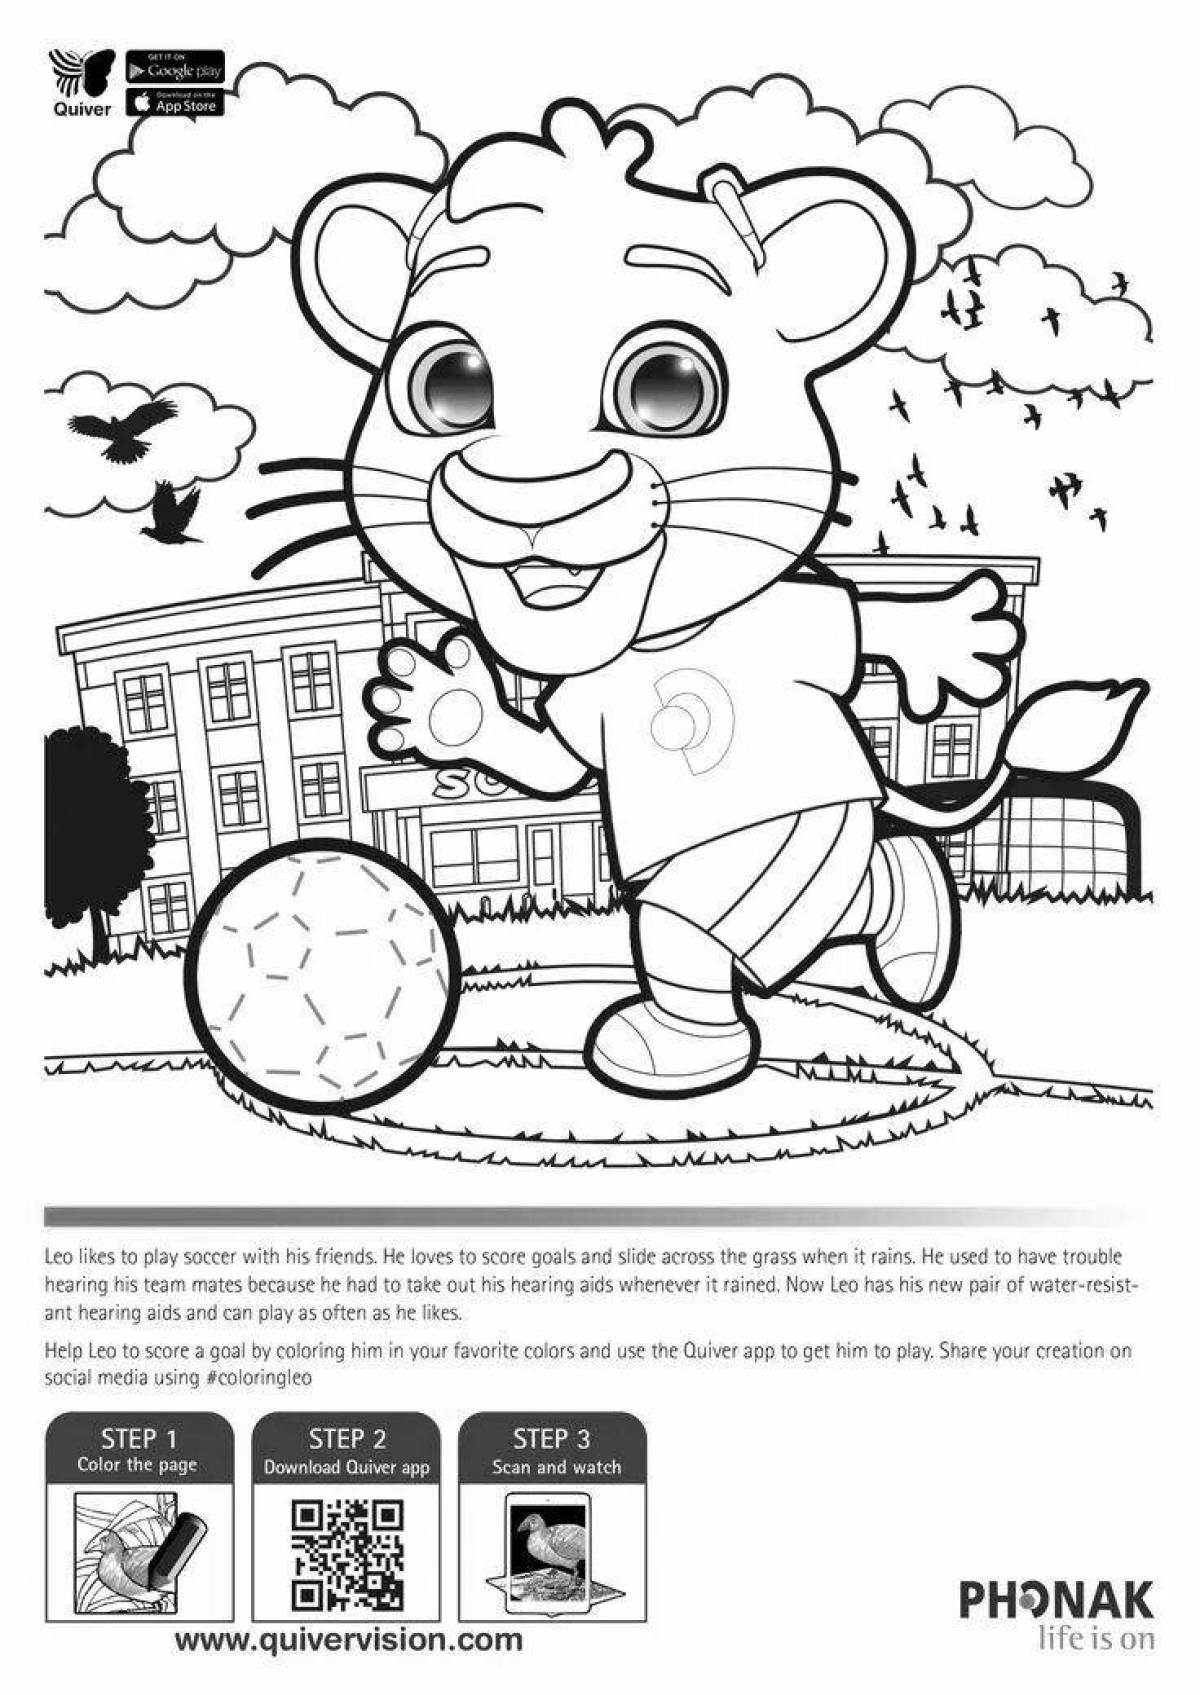 Playful quivervision coloring page